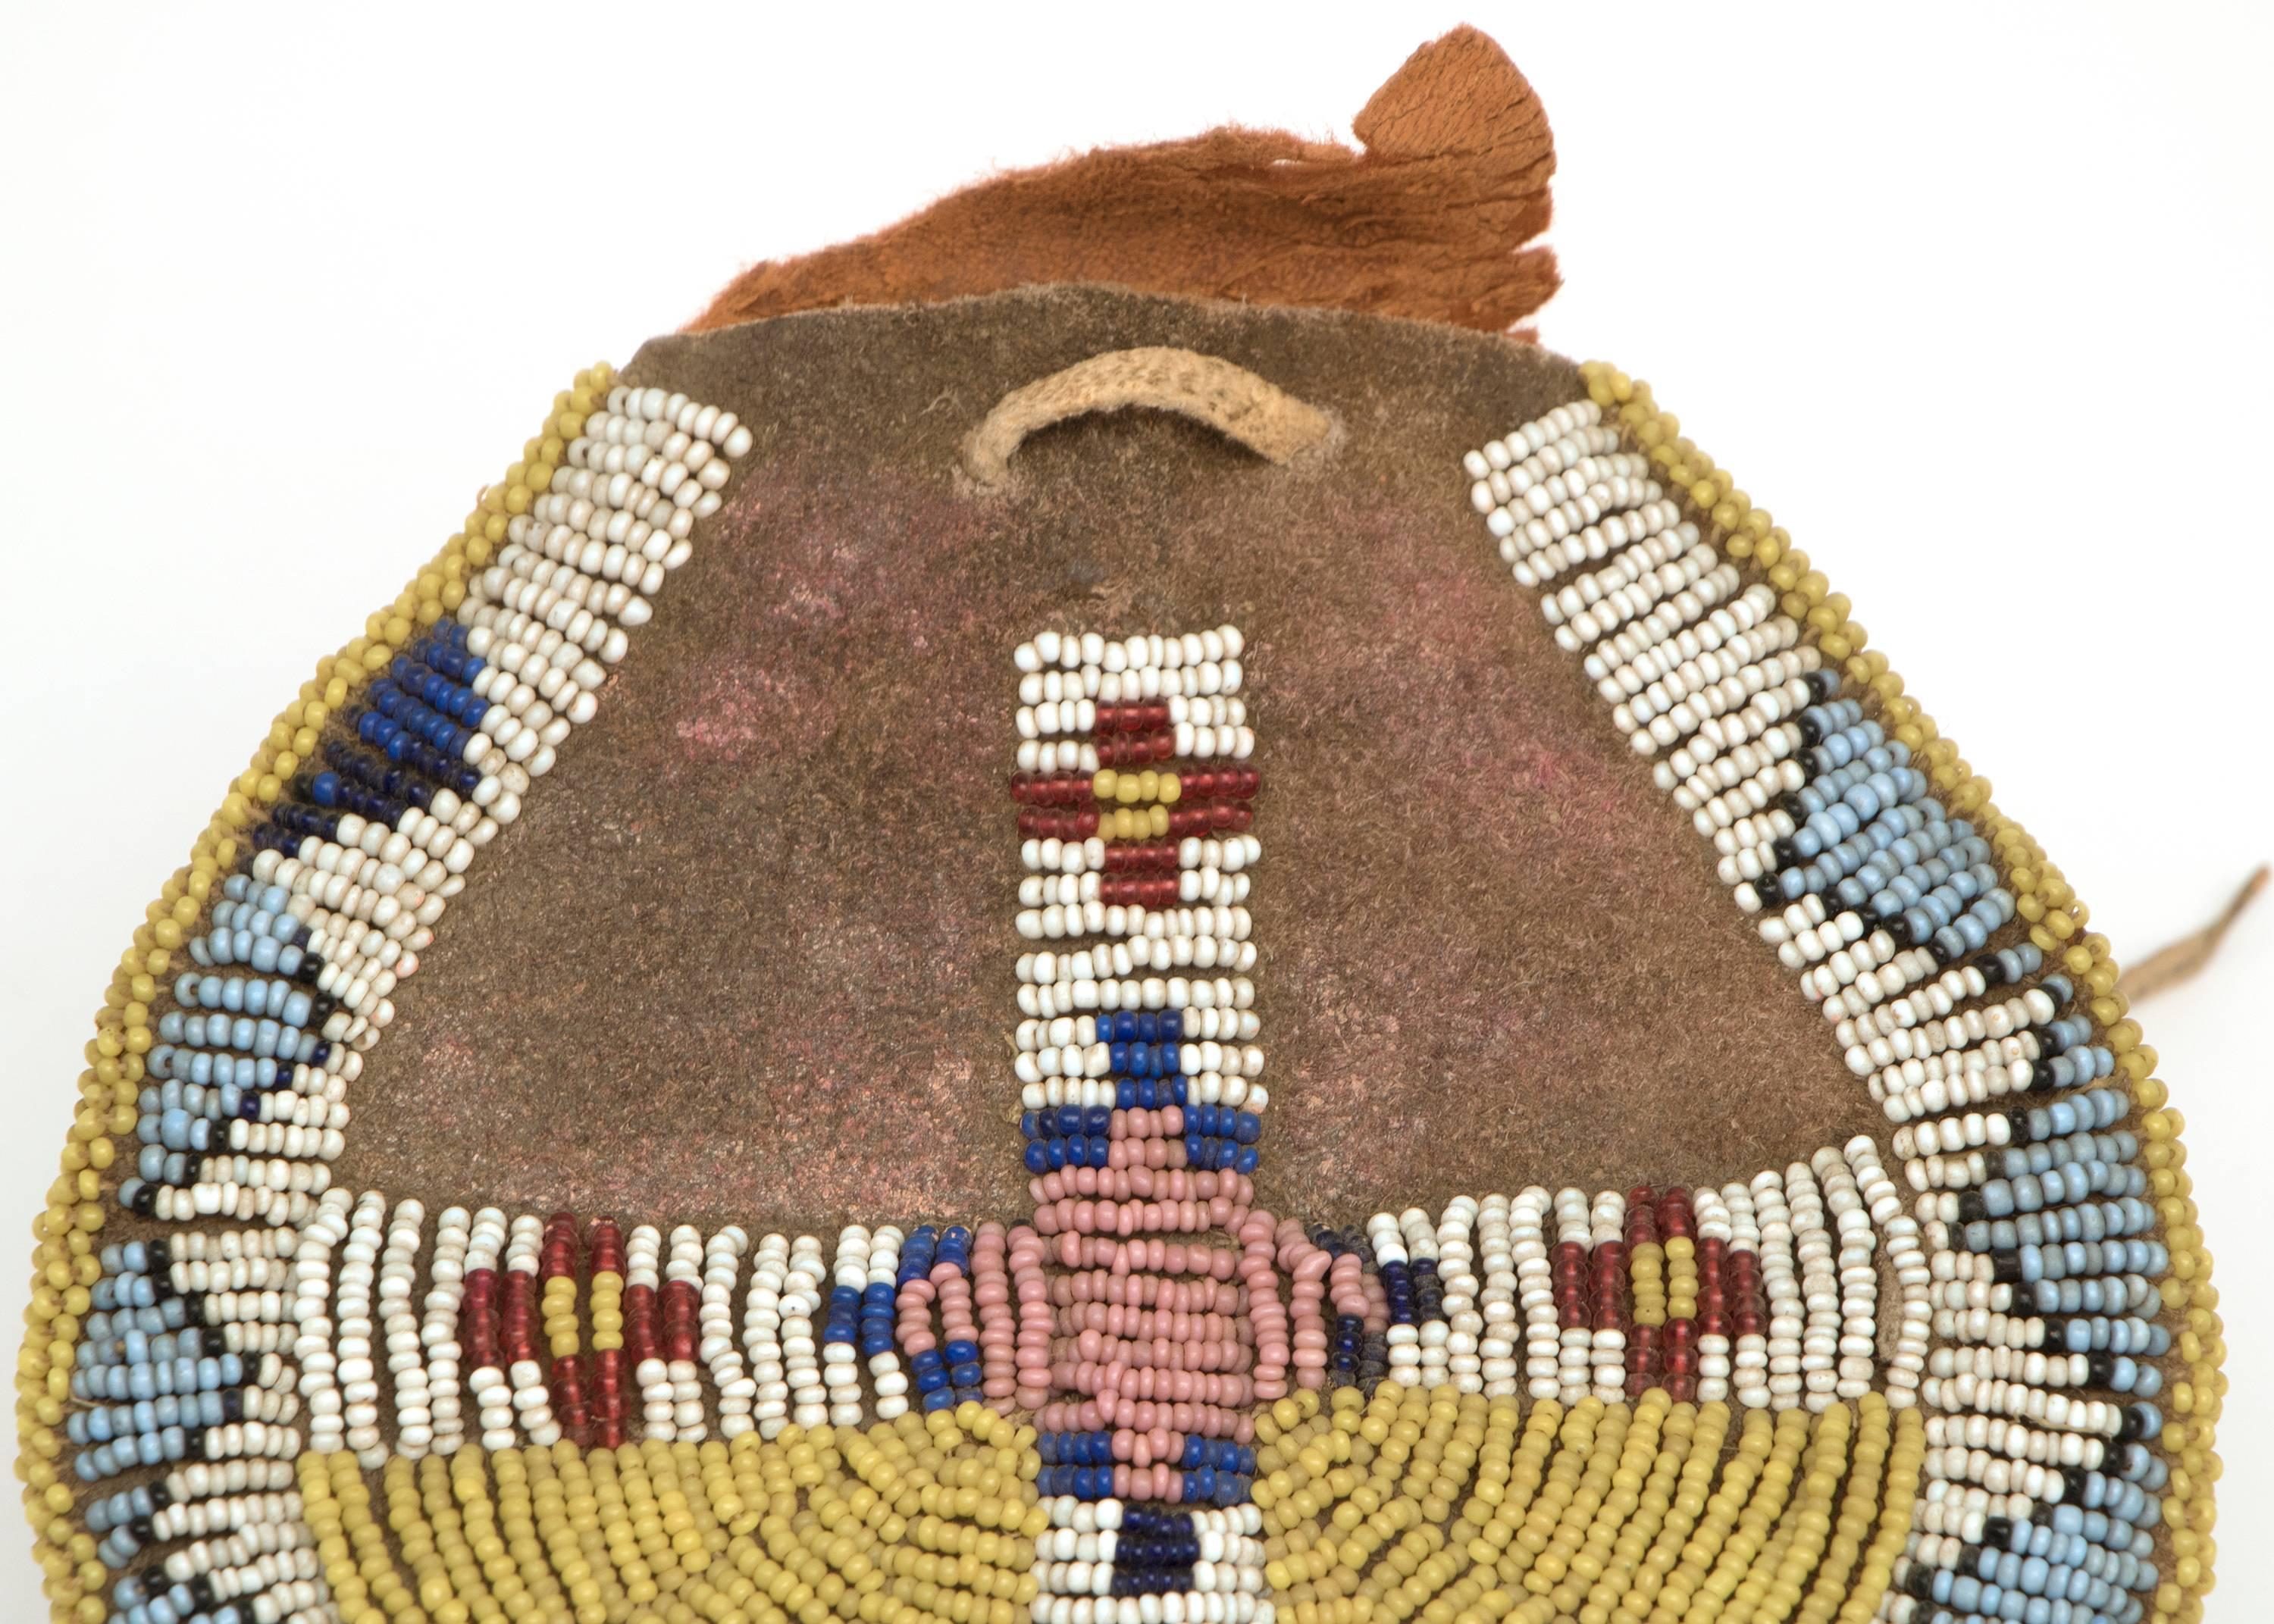 Constructed of native tanned hide and beaded in geometric patterns with stylized tepee and cross motifs in yellow, white, blue and red glass trade beads.

The Arapaho, members of the Plains Indian culture group, were nomadic with territory